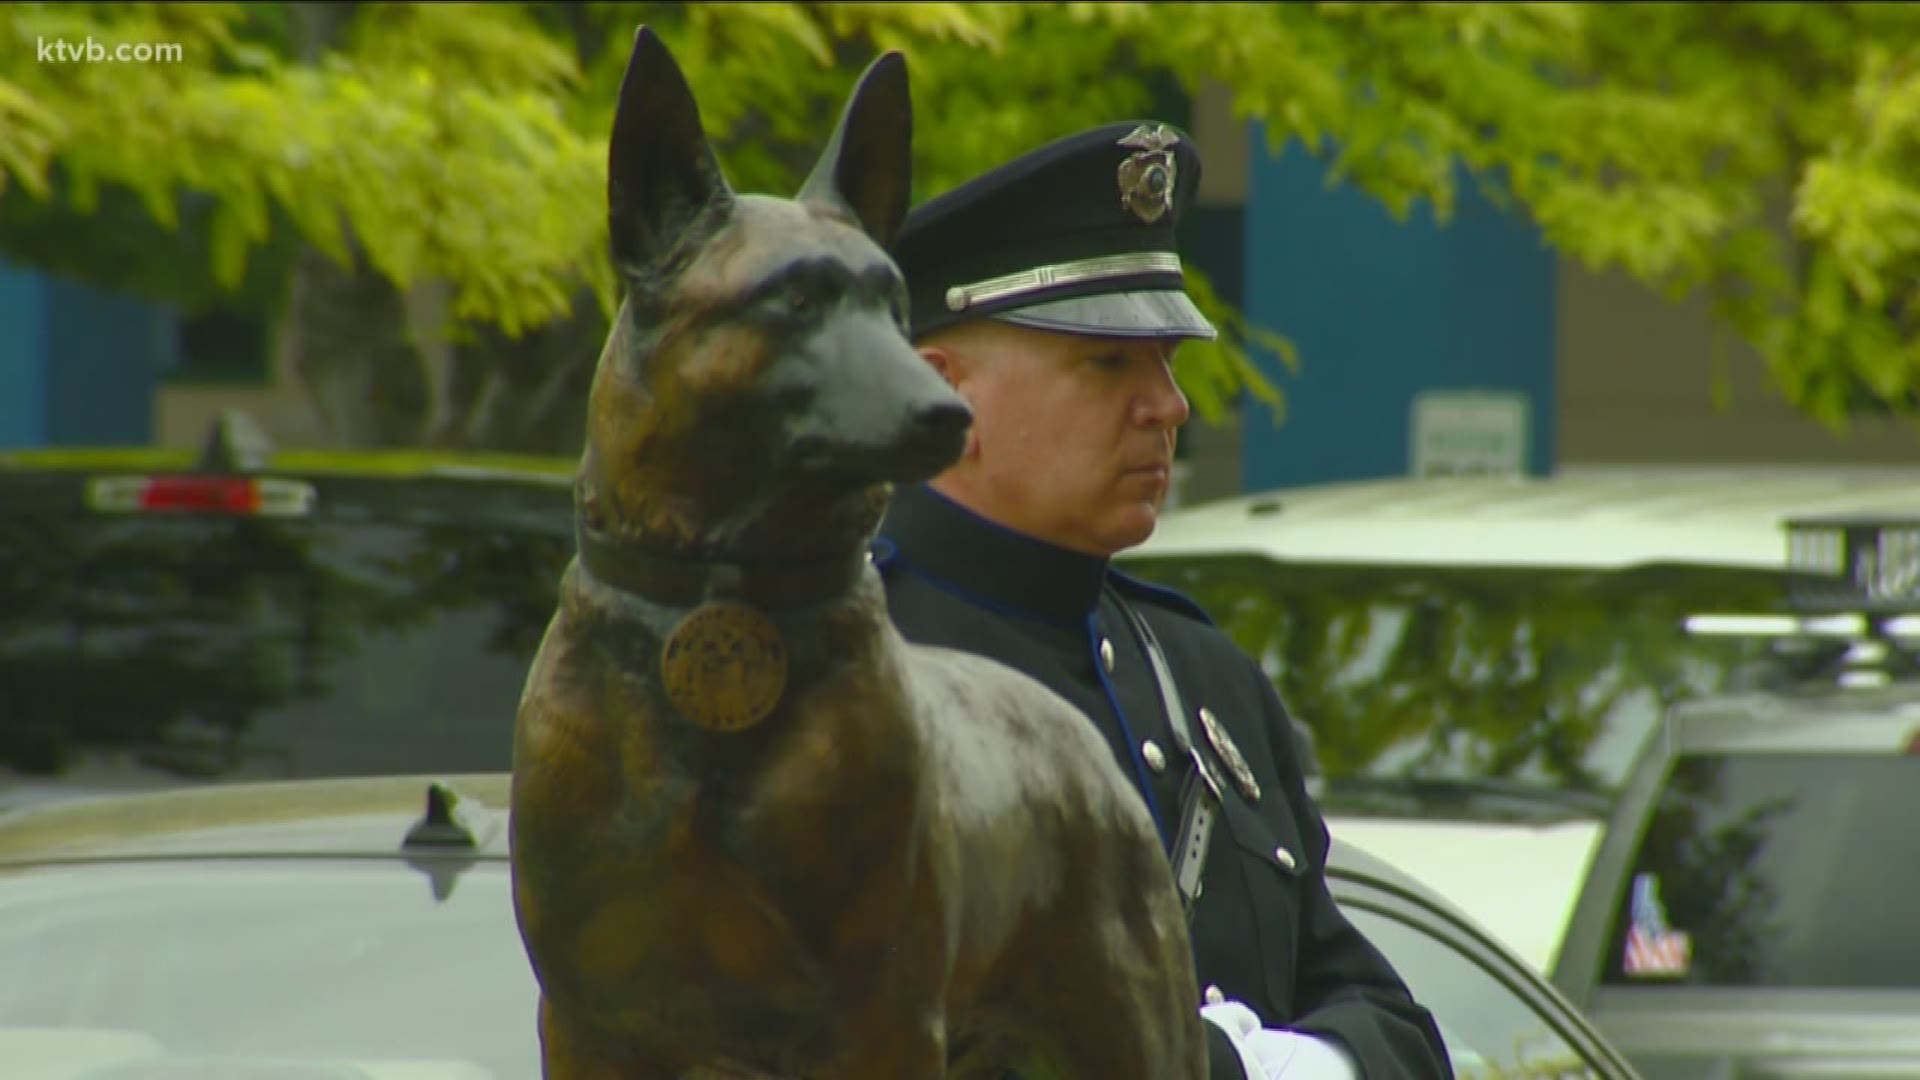 Fittingly, the K9 statue looks over the human memorial, just like in real life.